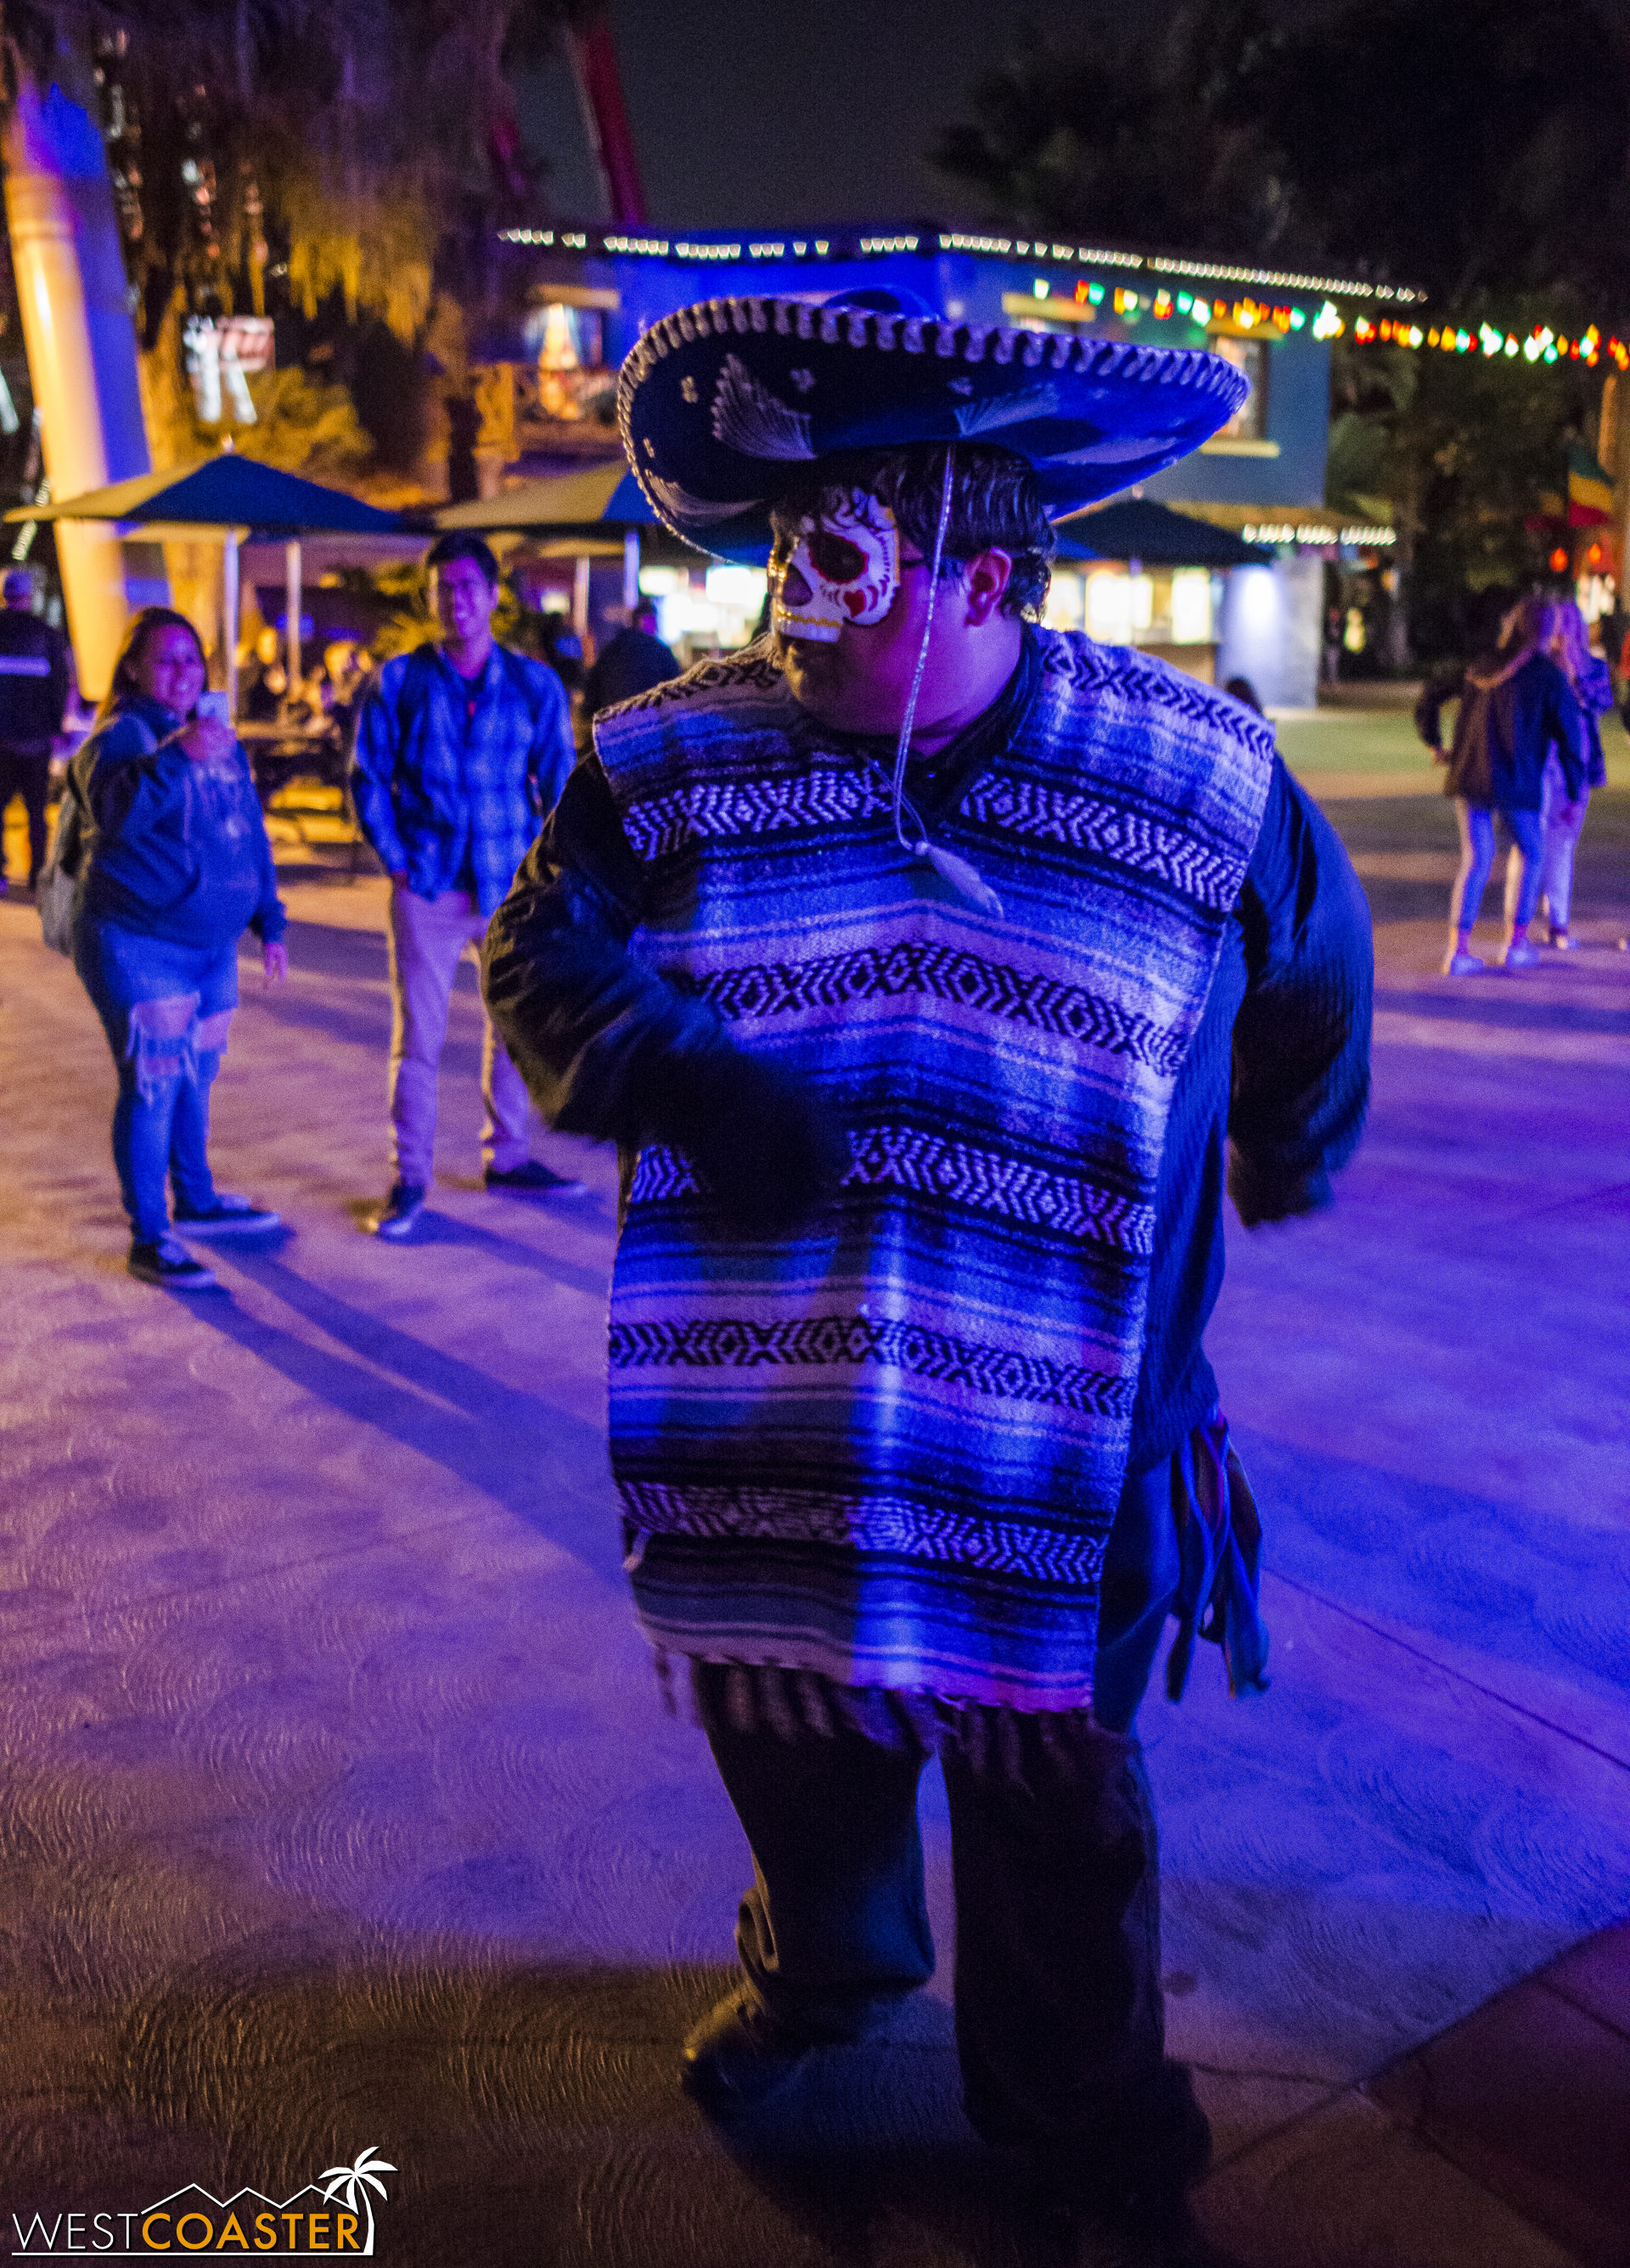  Fiesta monsters are not afraid to goof around.&nbsp; This one dances to the beat of the music before suddenly turning and scaring a neighboring guest. 